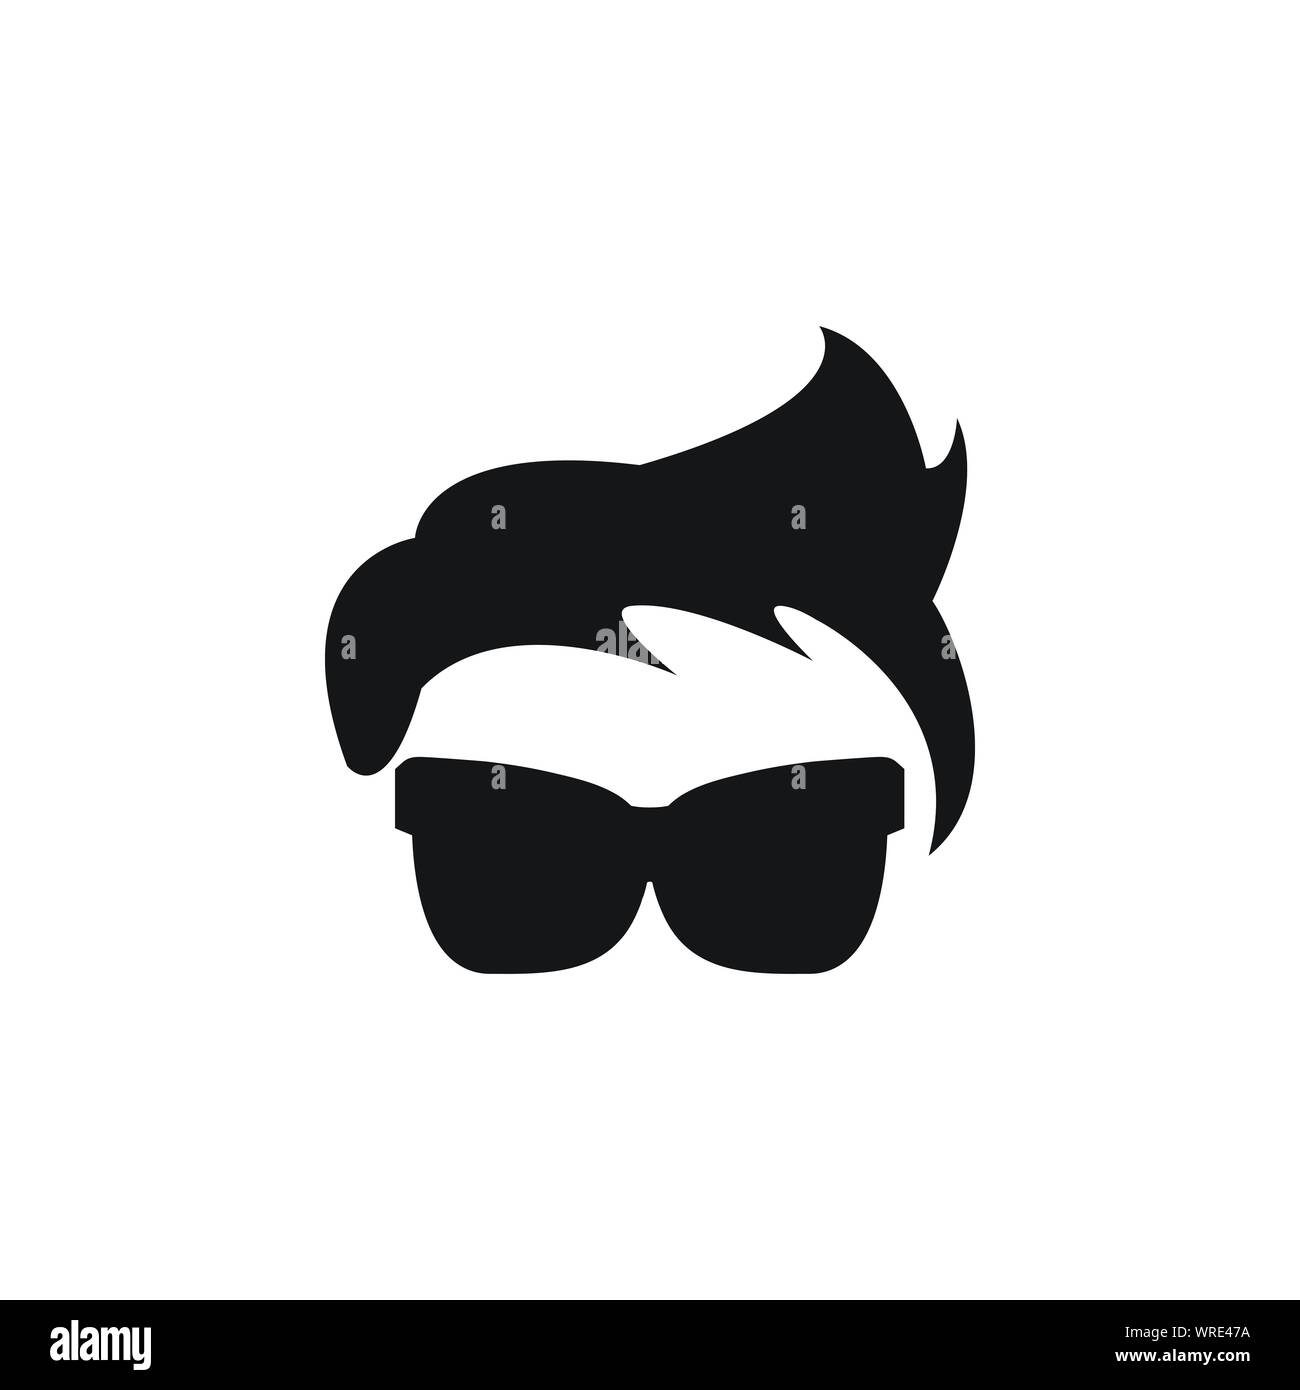 glasses-graphic-design-template-vector-isolated-illustration-stock